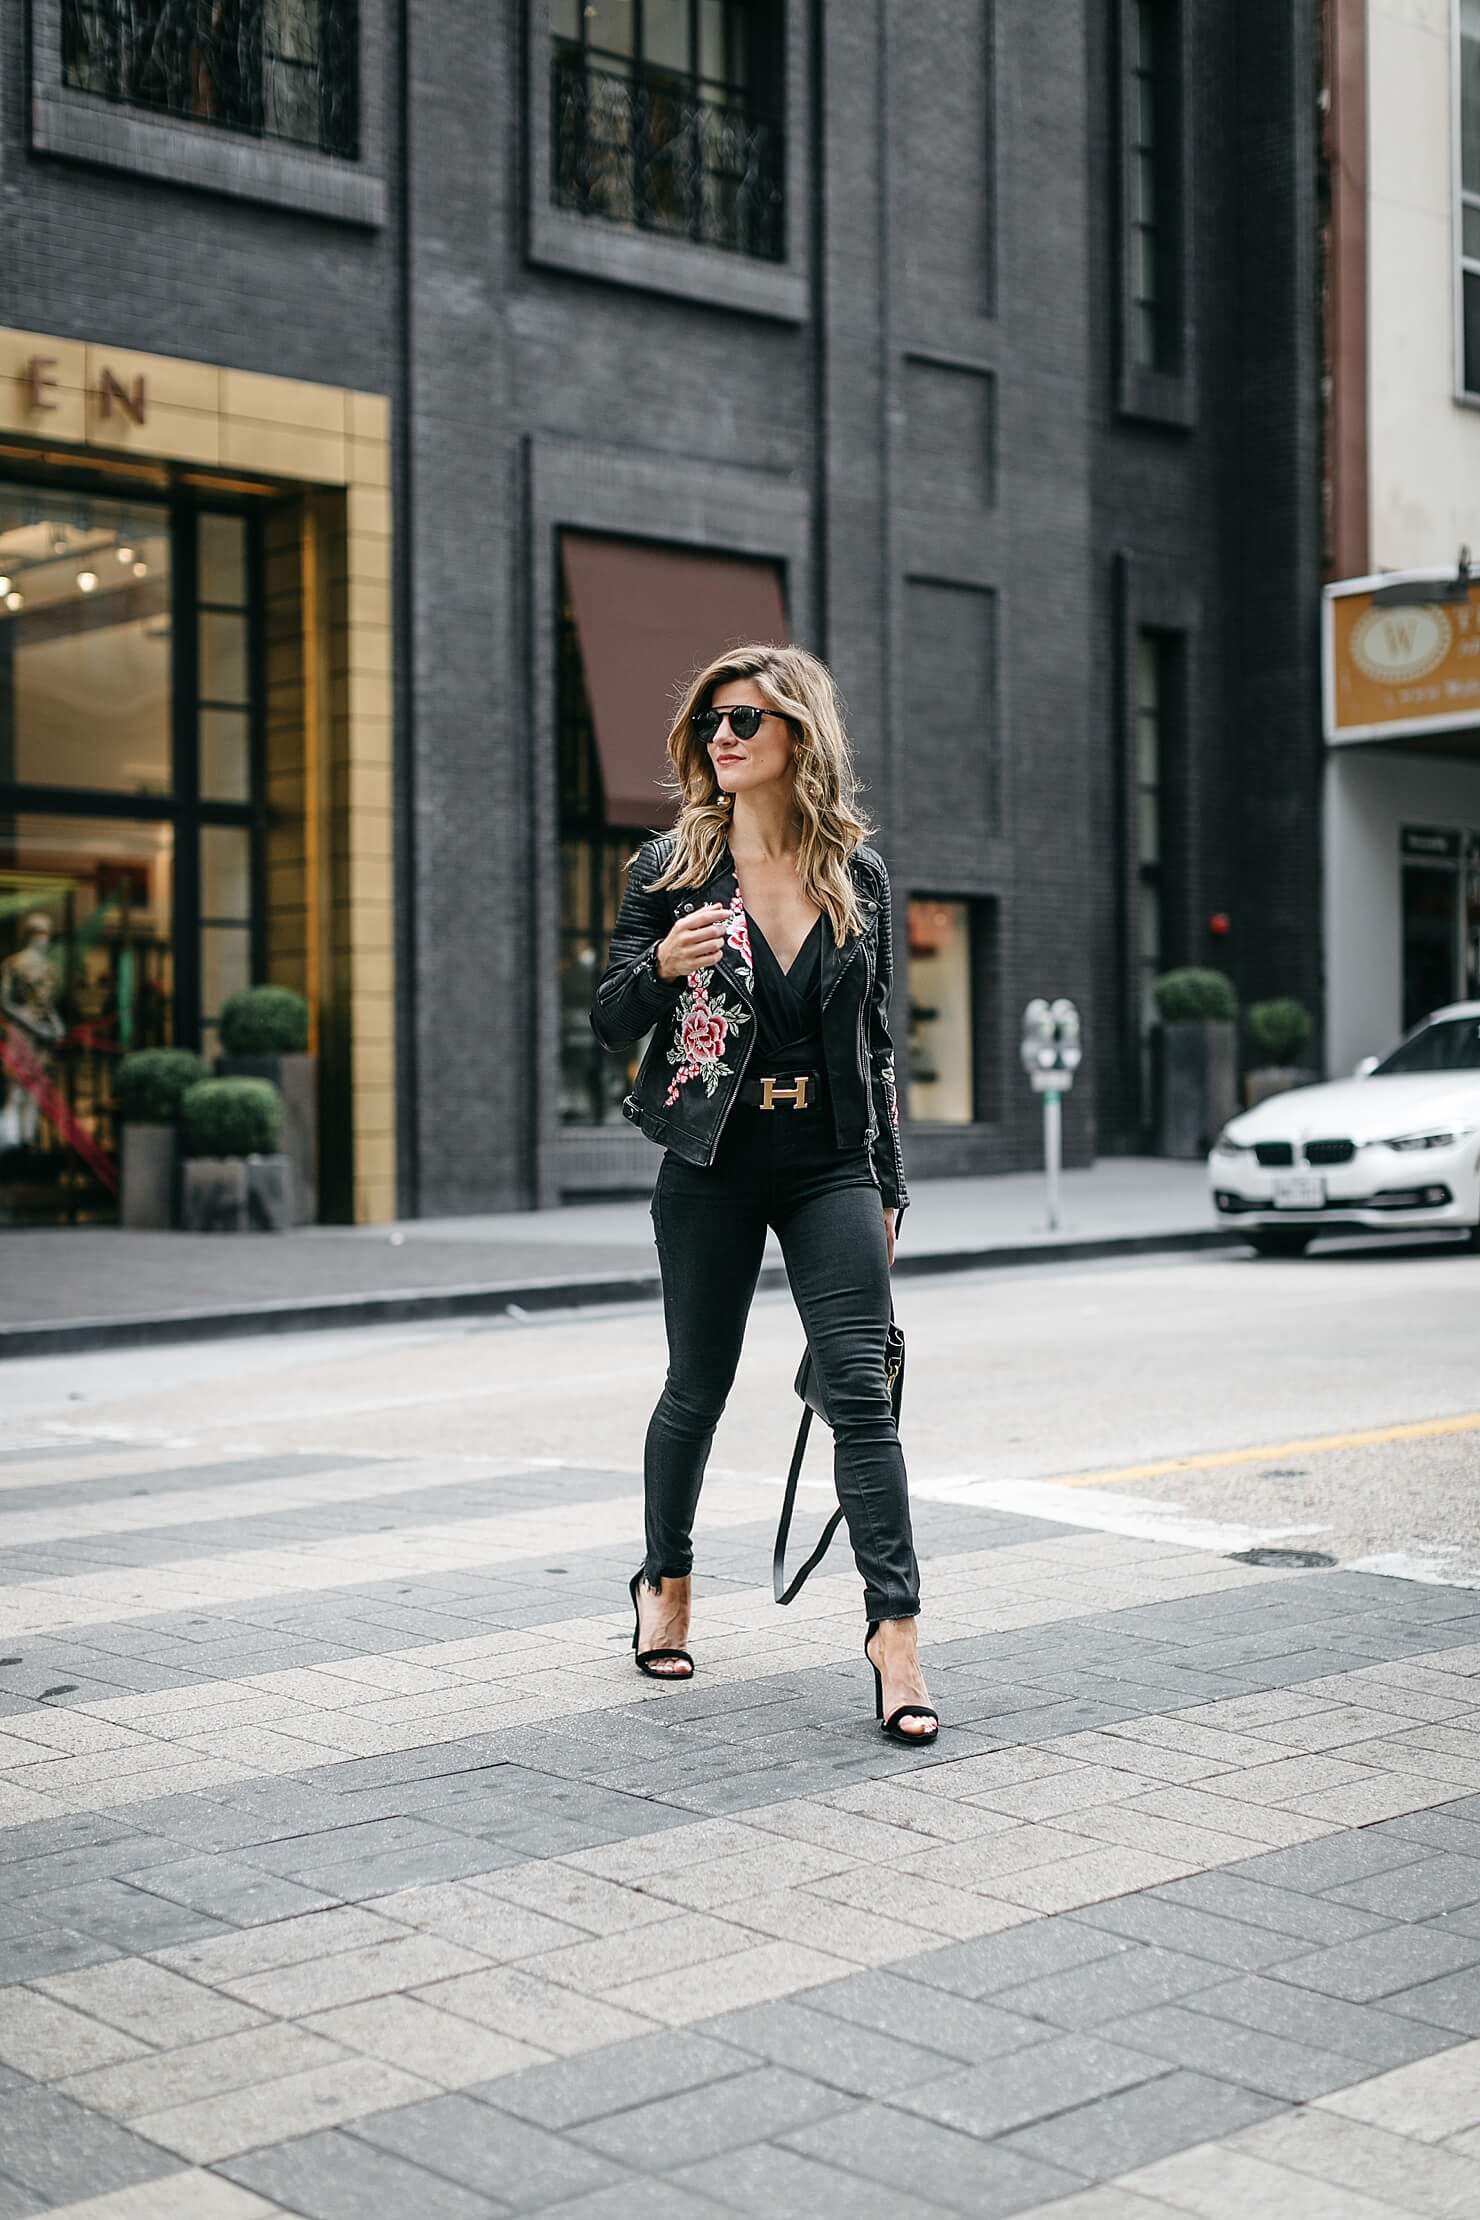 all black bodysuit outfit with embroidered leather jacket, black jeans, statement belt, and heels